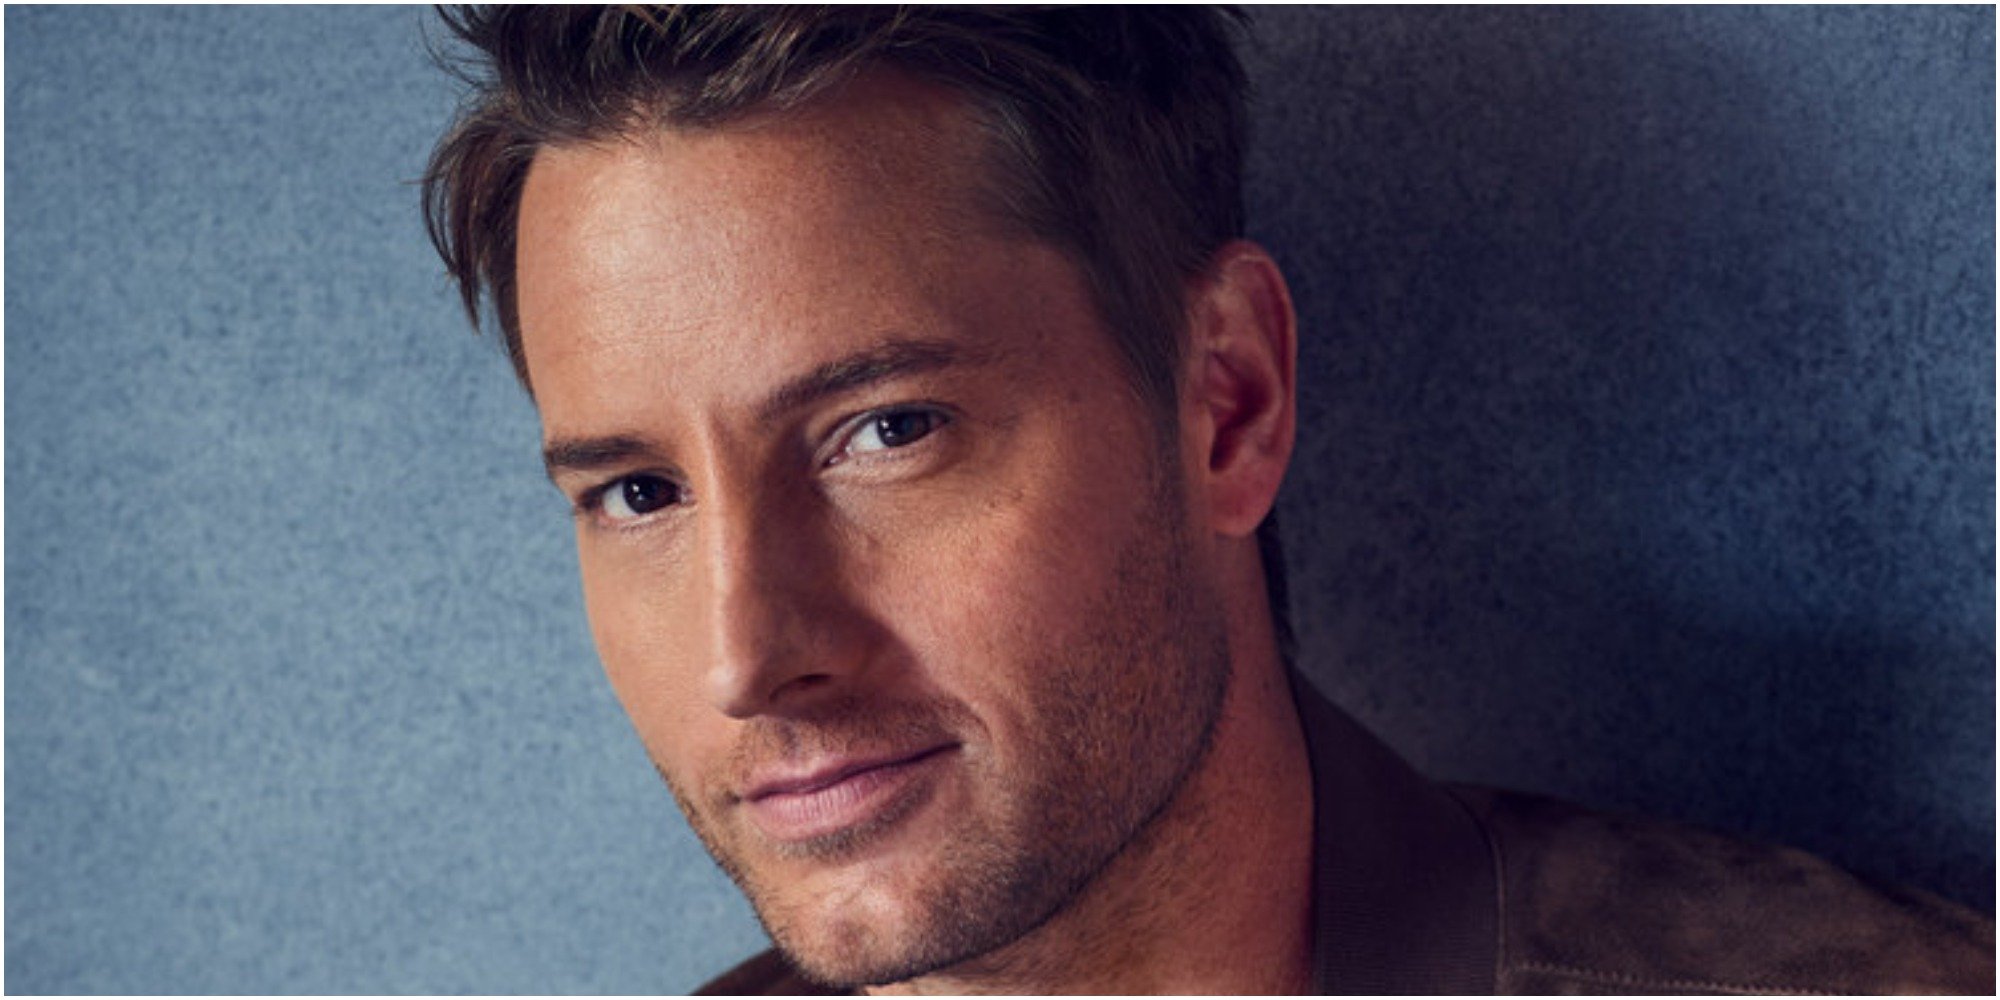 This Is Us star Justin Hartley as Kevin Pearson